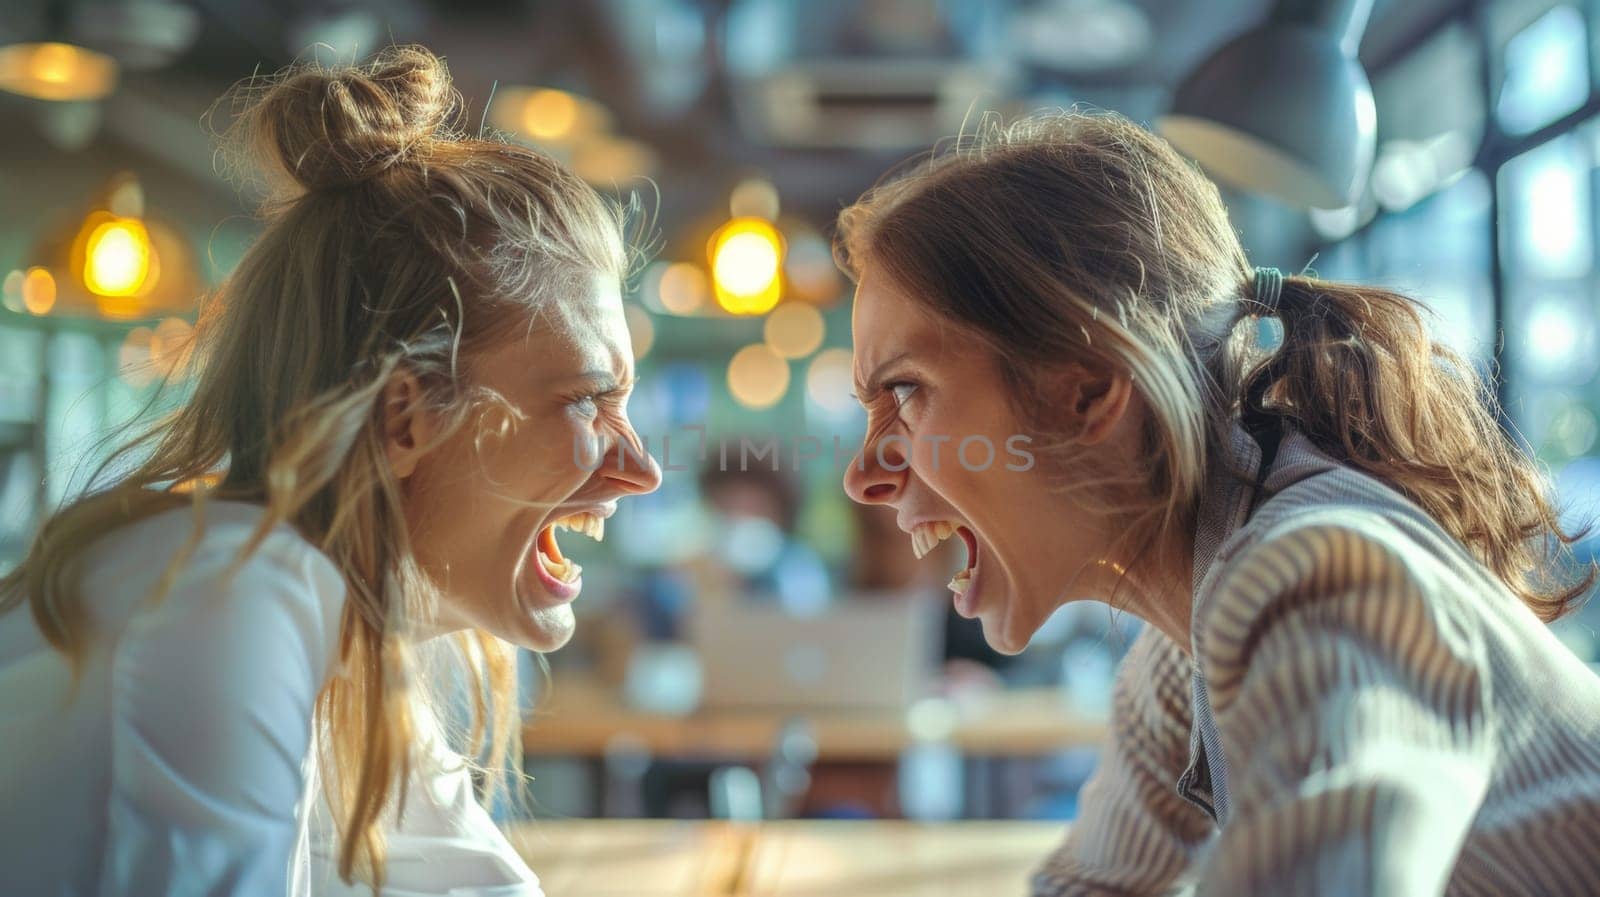 Two women laughing at each other in a restaurant